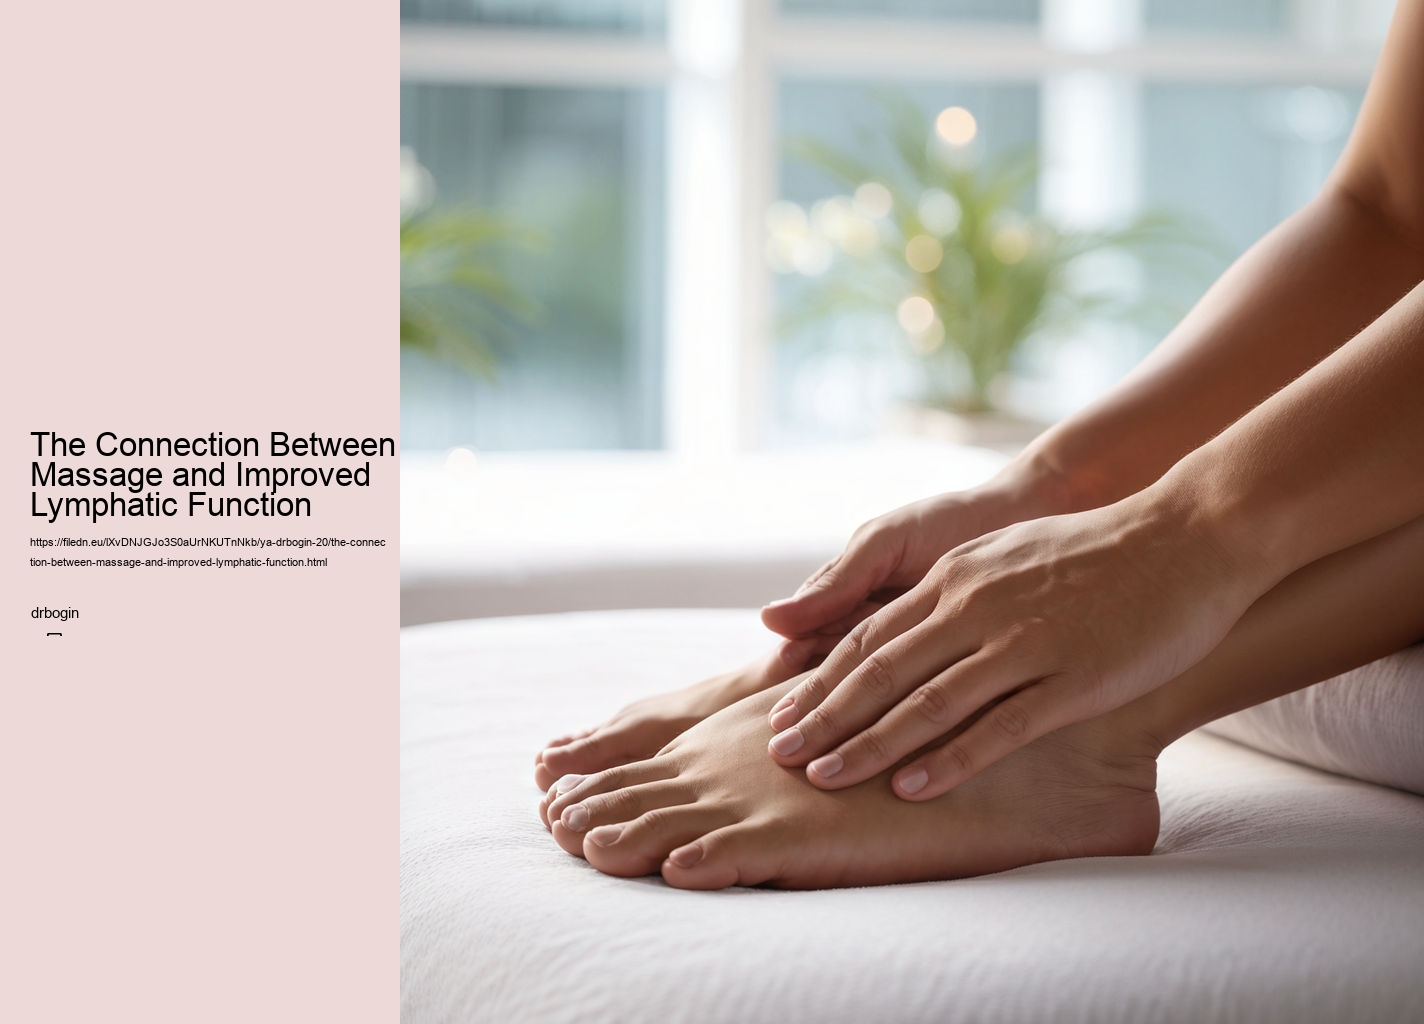 The Connection Between Massage and Improved Lymphatic Function